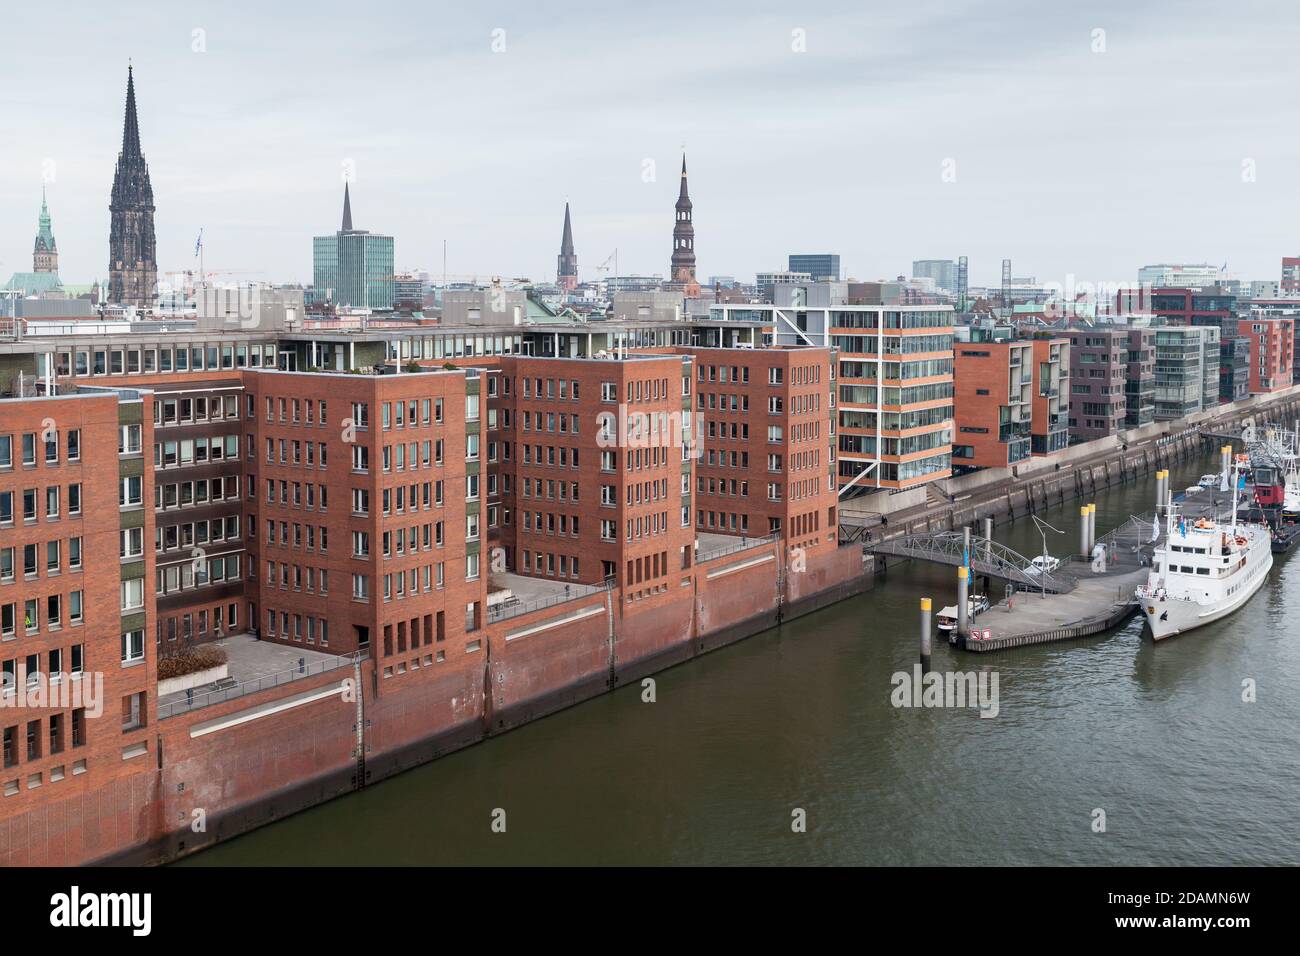 Hamburg, Germany. Aerial view with old Gothic Cathedrals spires and modern buildings Stock Photo